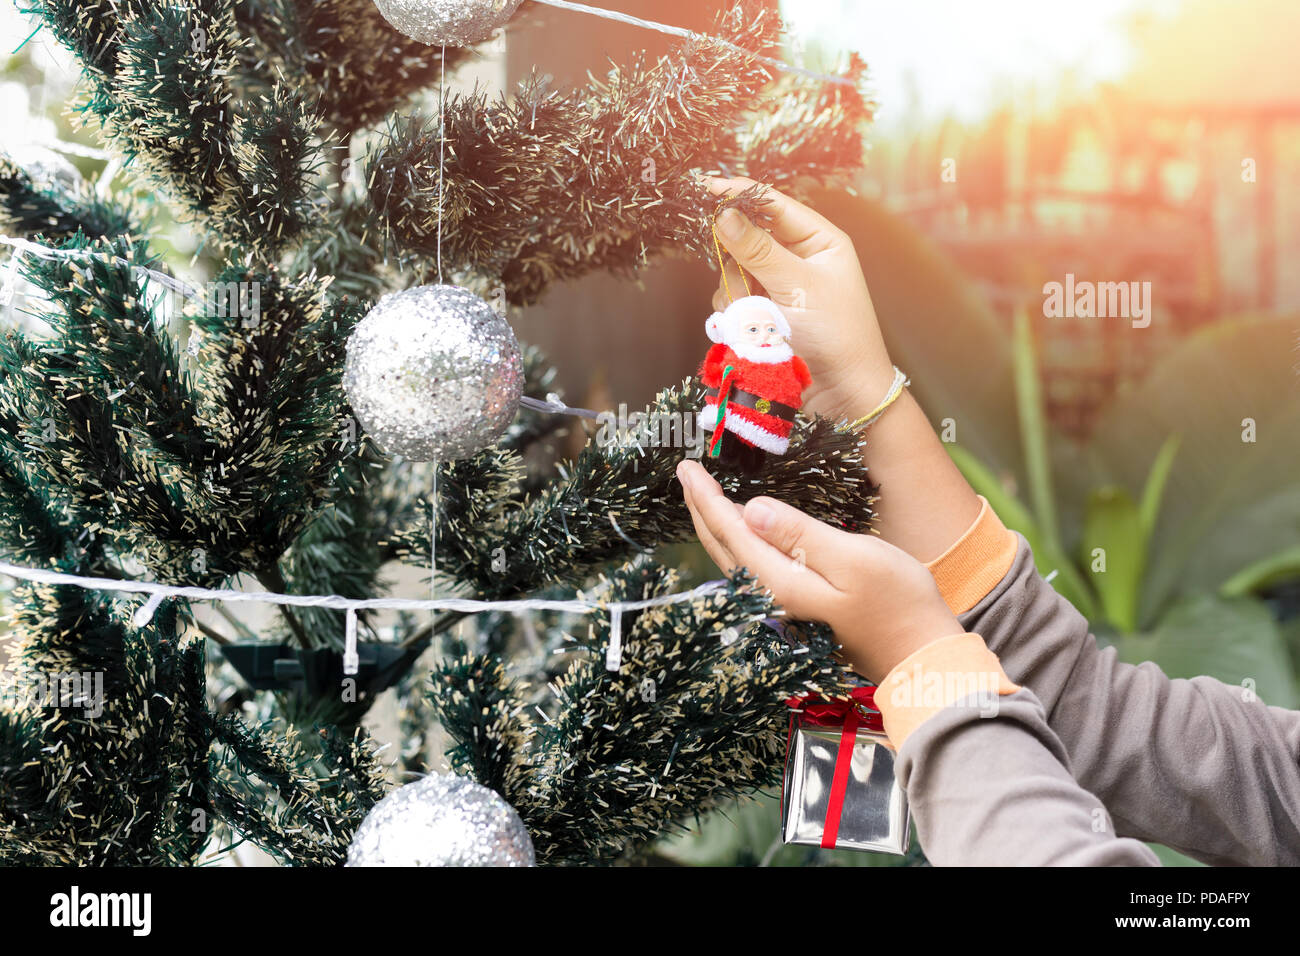 Little boy decorate Christmas tree with Santa Claus dolls decoration in sunlight. Stock Photo